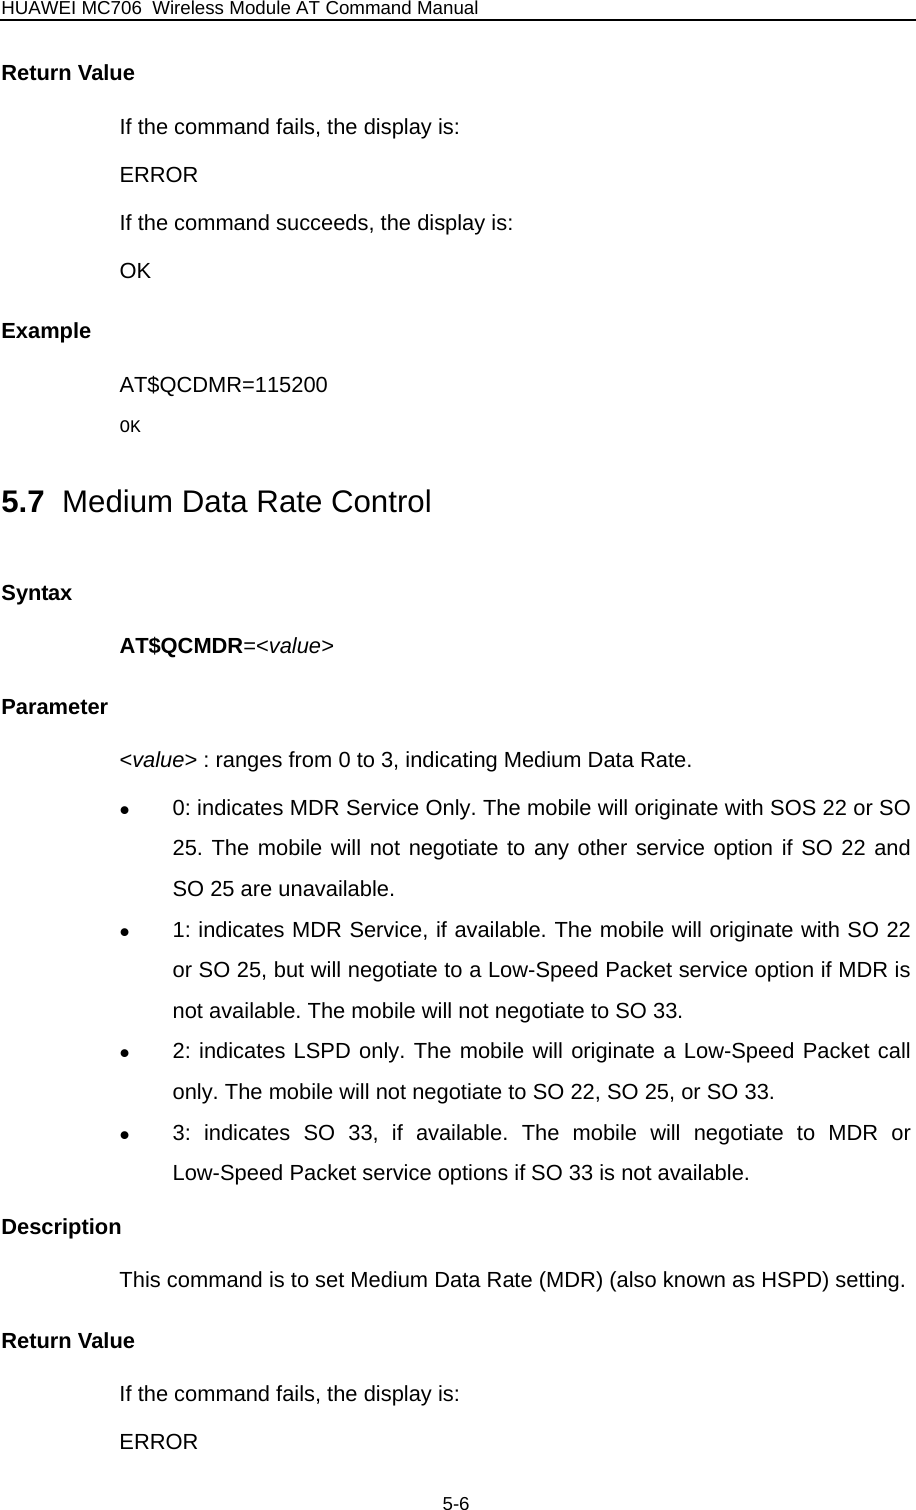 HUAWEI MC706 Wireless Module AT Command Manual Return Value If the command fails, the display is: ERROR If the command succeeds, the display is: OK Example AT$QCDMR=115200 OK 5.7  Medium Data Rate Control Syntax AT$QCMDR=&lt;value&gt; Parameter &lt;value&gt; : ranges from 0 to 3, indicating Medium Data Rate. z 0: indicates MDR Service Only. The mobile will originate with SOS 22 or SO 25. The mobile will not negotiate to any other service option if SO 22 and SO 25 are unavailable. z 1: indicates MDR Service, if available. The mobile will originate with SO 22 or SO 25, but will negotiate to a Low-Speed Packet service option if MDR is not available. The mobile will not negotiate to SO 33. z 2: indicates LSPD only. The mobile will originate a Low-Speed Packet call only. The mobile will not negotiate to SO 22, SO 25, or SO 33. z 3: indicates SO 33, if available. The mobile will negotiate to MDR or Low-Speed Packet service options if SO 33 is not available.   Description This command is to set Medium Data Rate (MDR) (also known as HSPD) setting. Return Value If the command fails, the display is: ERROR 5-6 